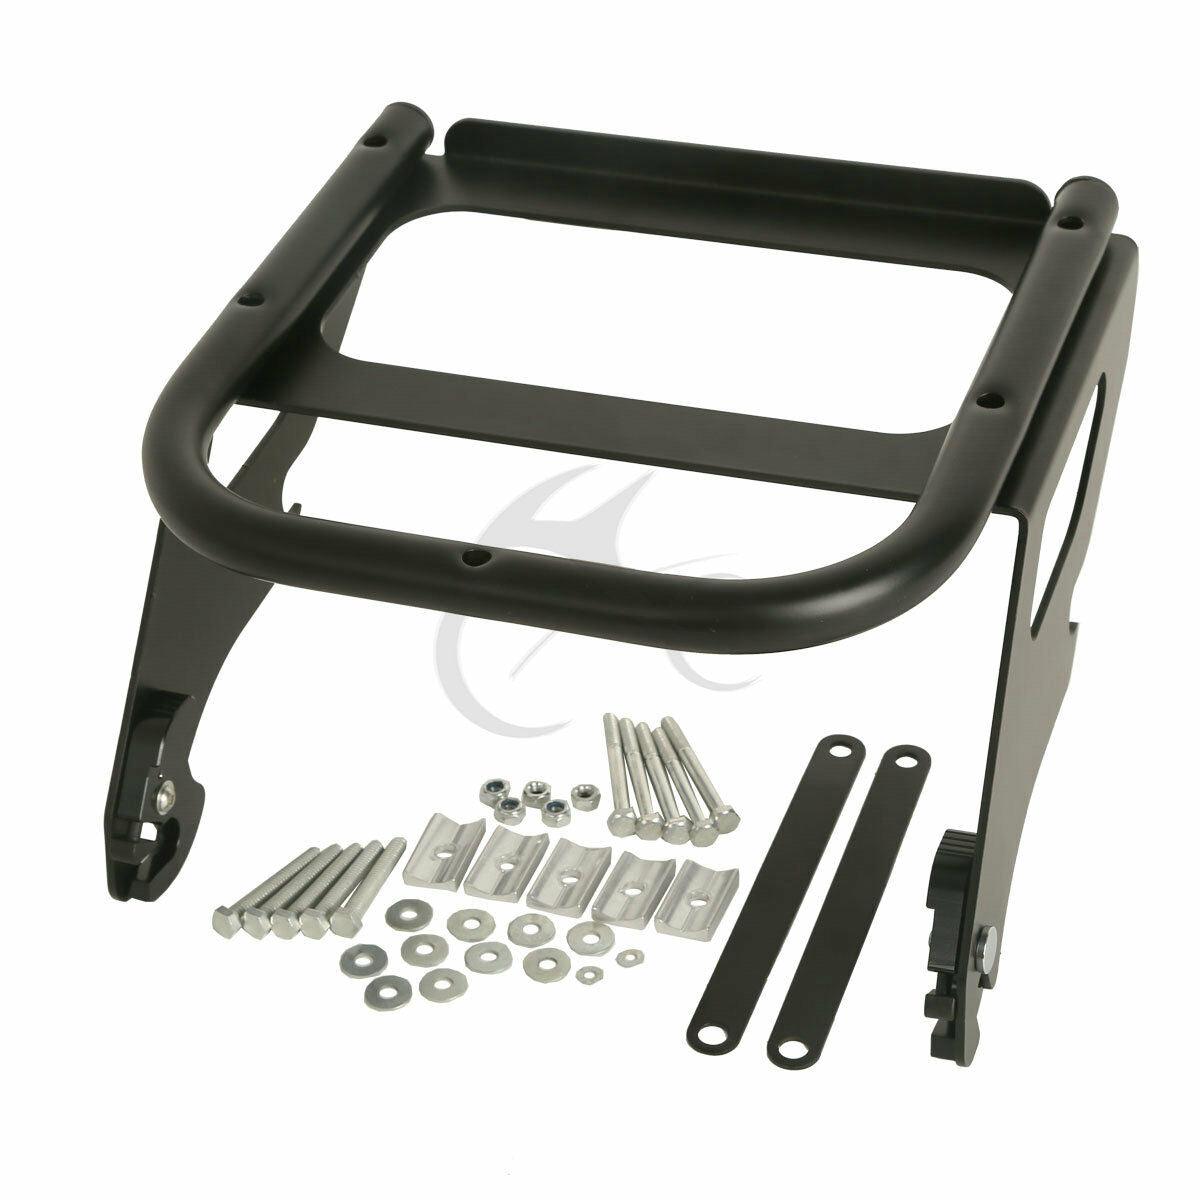 Detachable Solo Luggage Rack Fit For Harley Tour Pak Touring Road King 97-08 - Moto Life Products